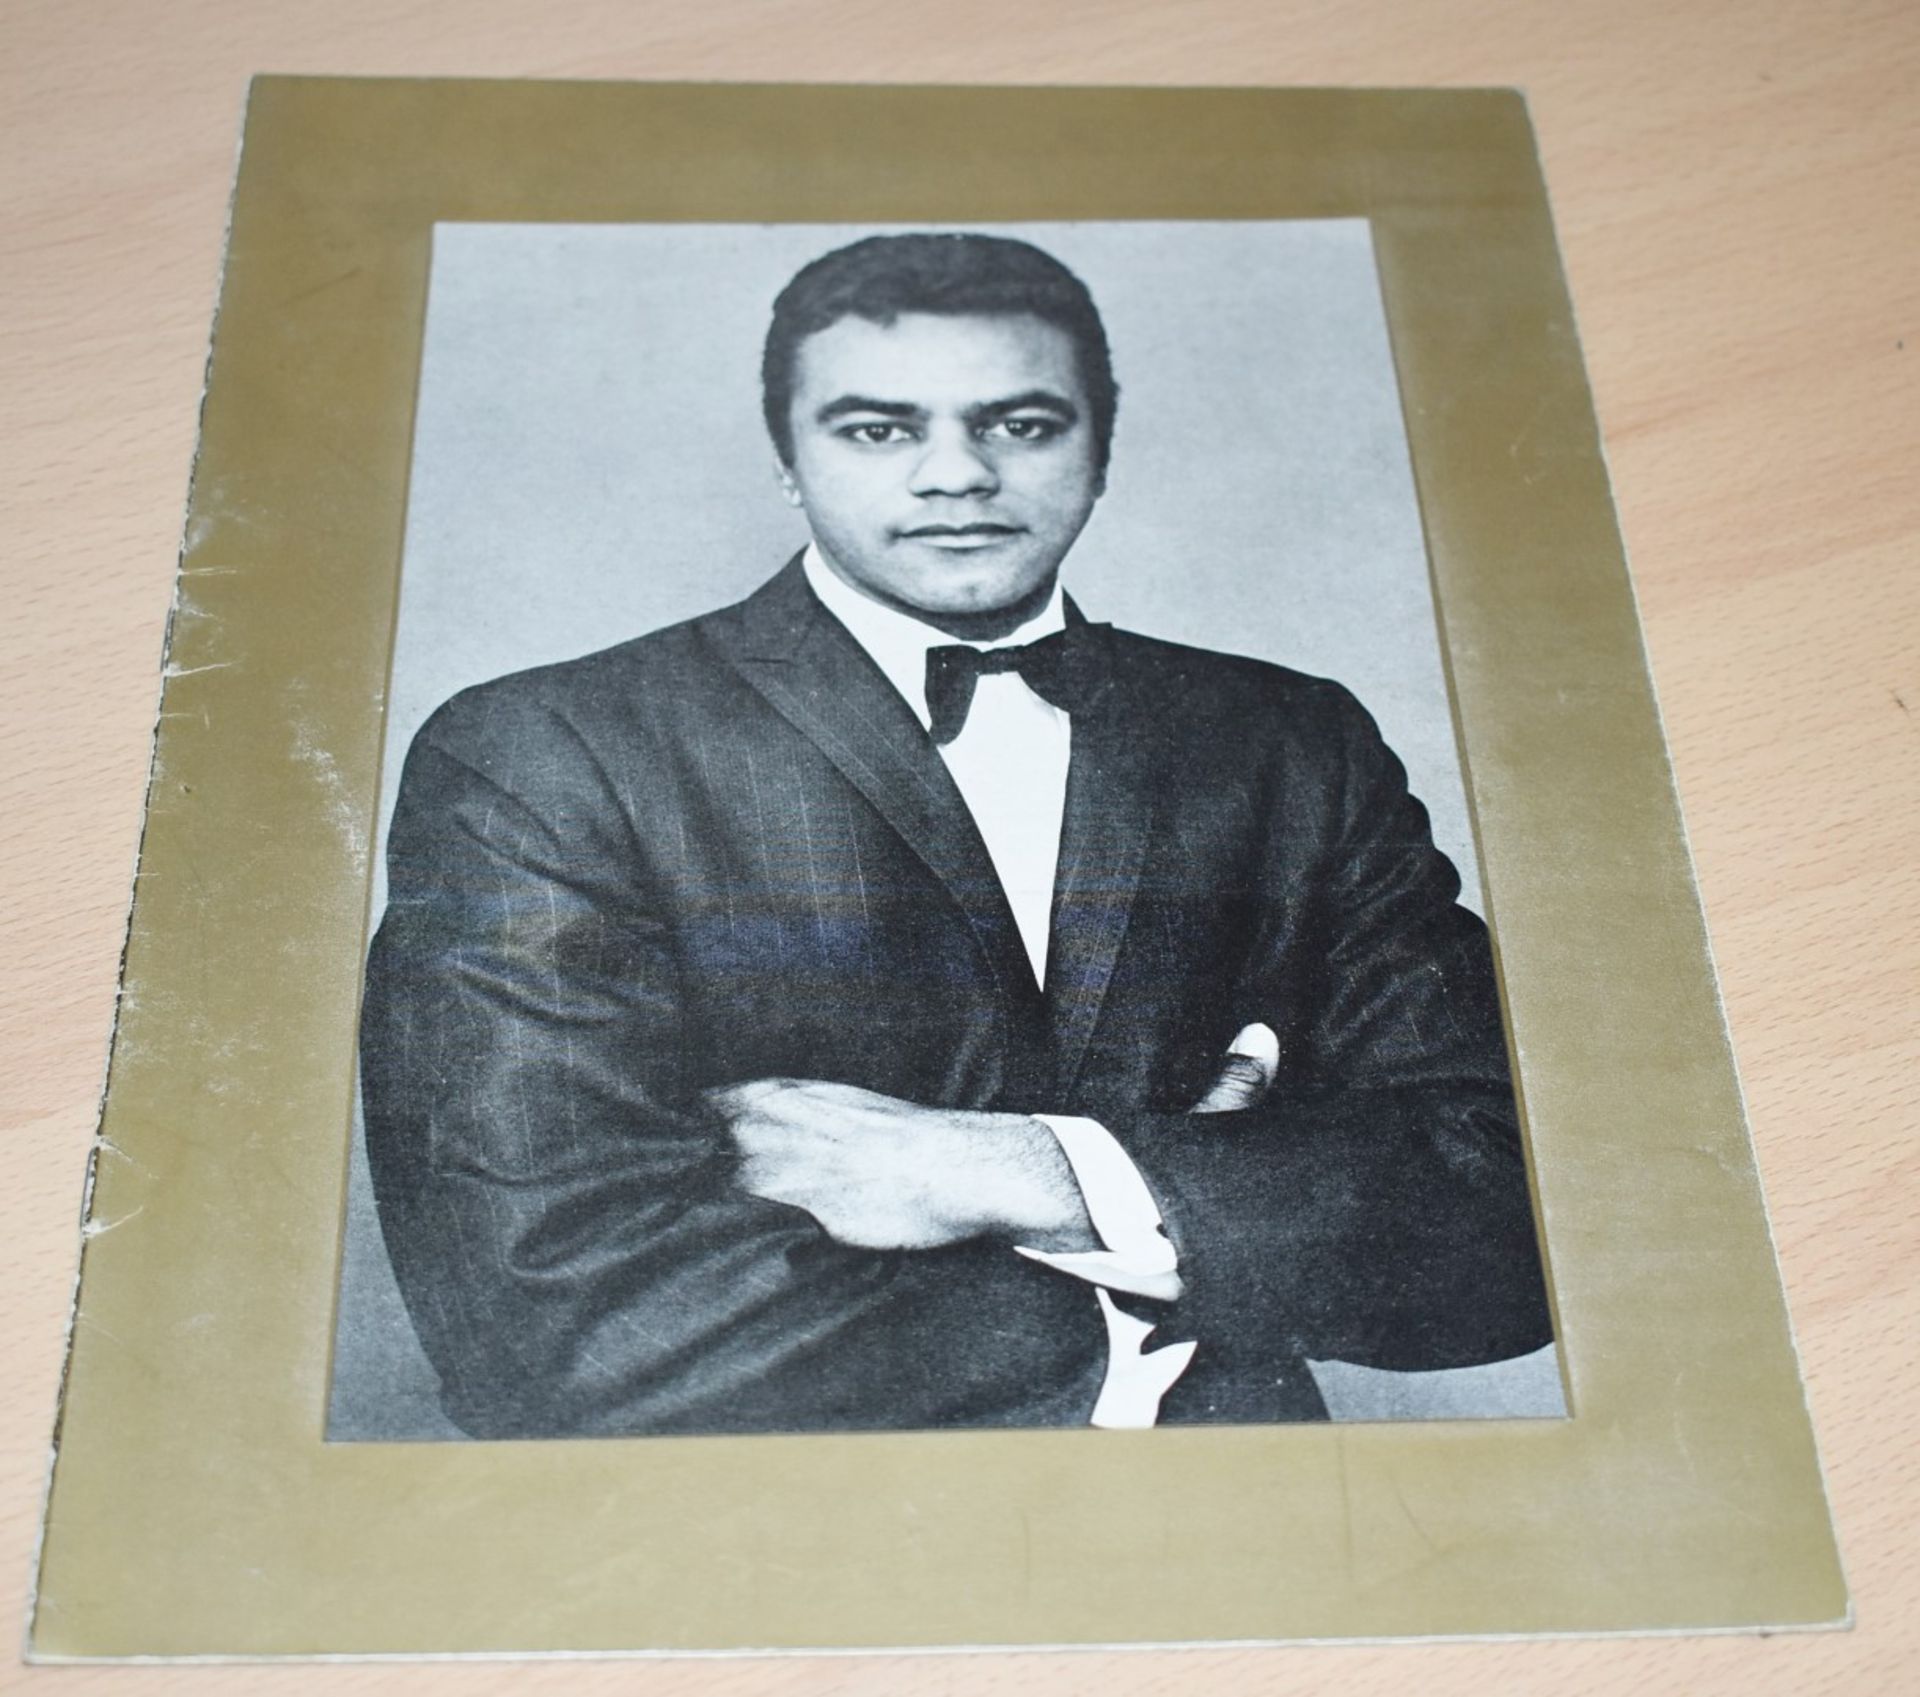 1 x Johnny Mathis With Syd Lawrence and His Orchestra - London Palladium 1971 Brochure - Ref MB138 -